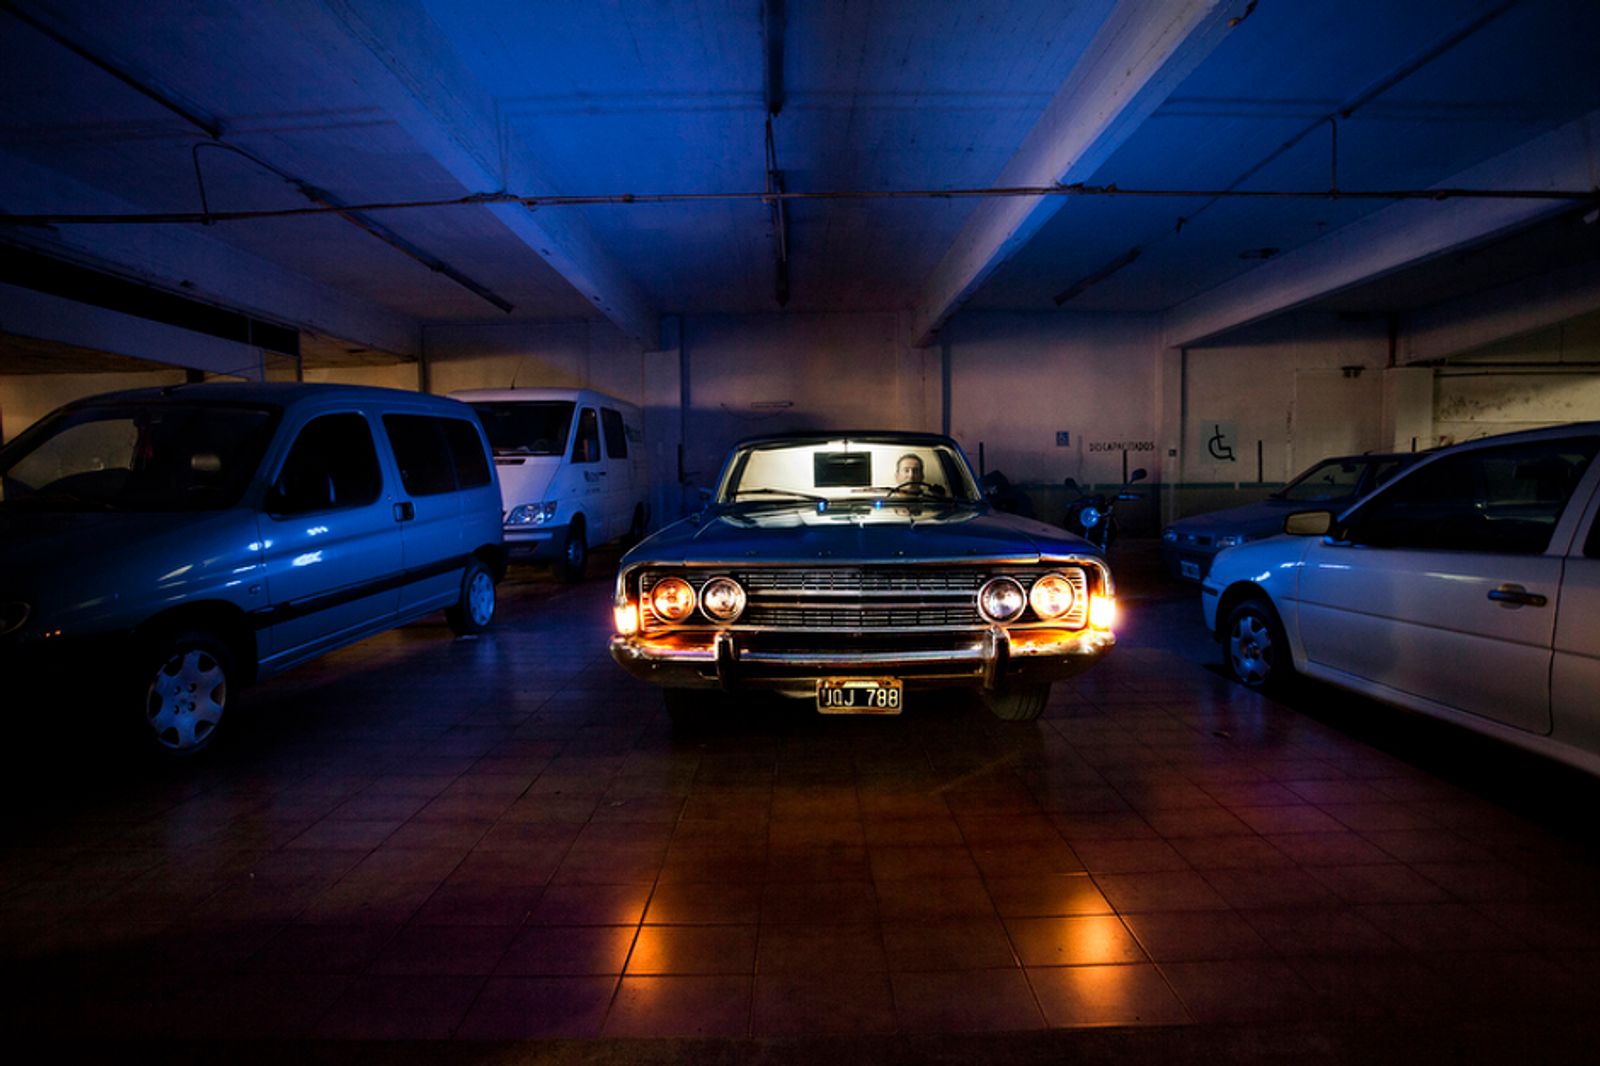 © Myriam Meloni - In the darkness of the garage, the limousine is once again a normal car.